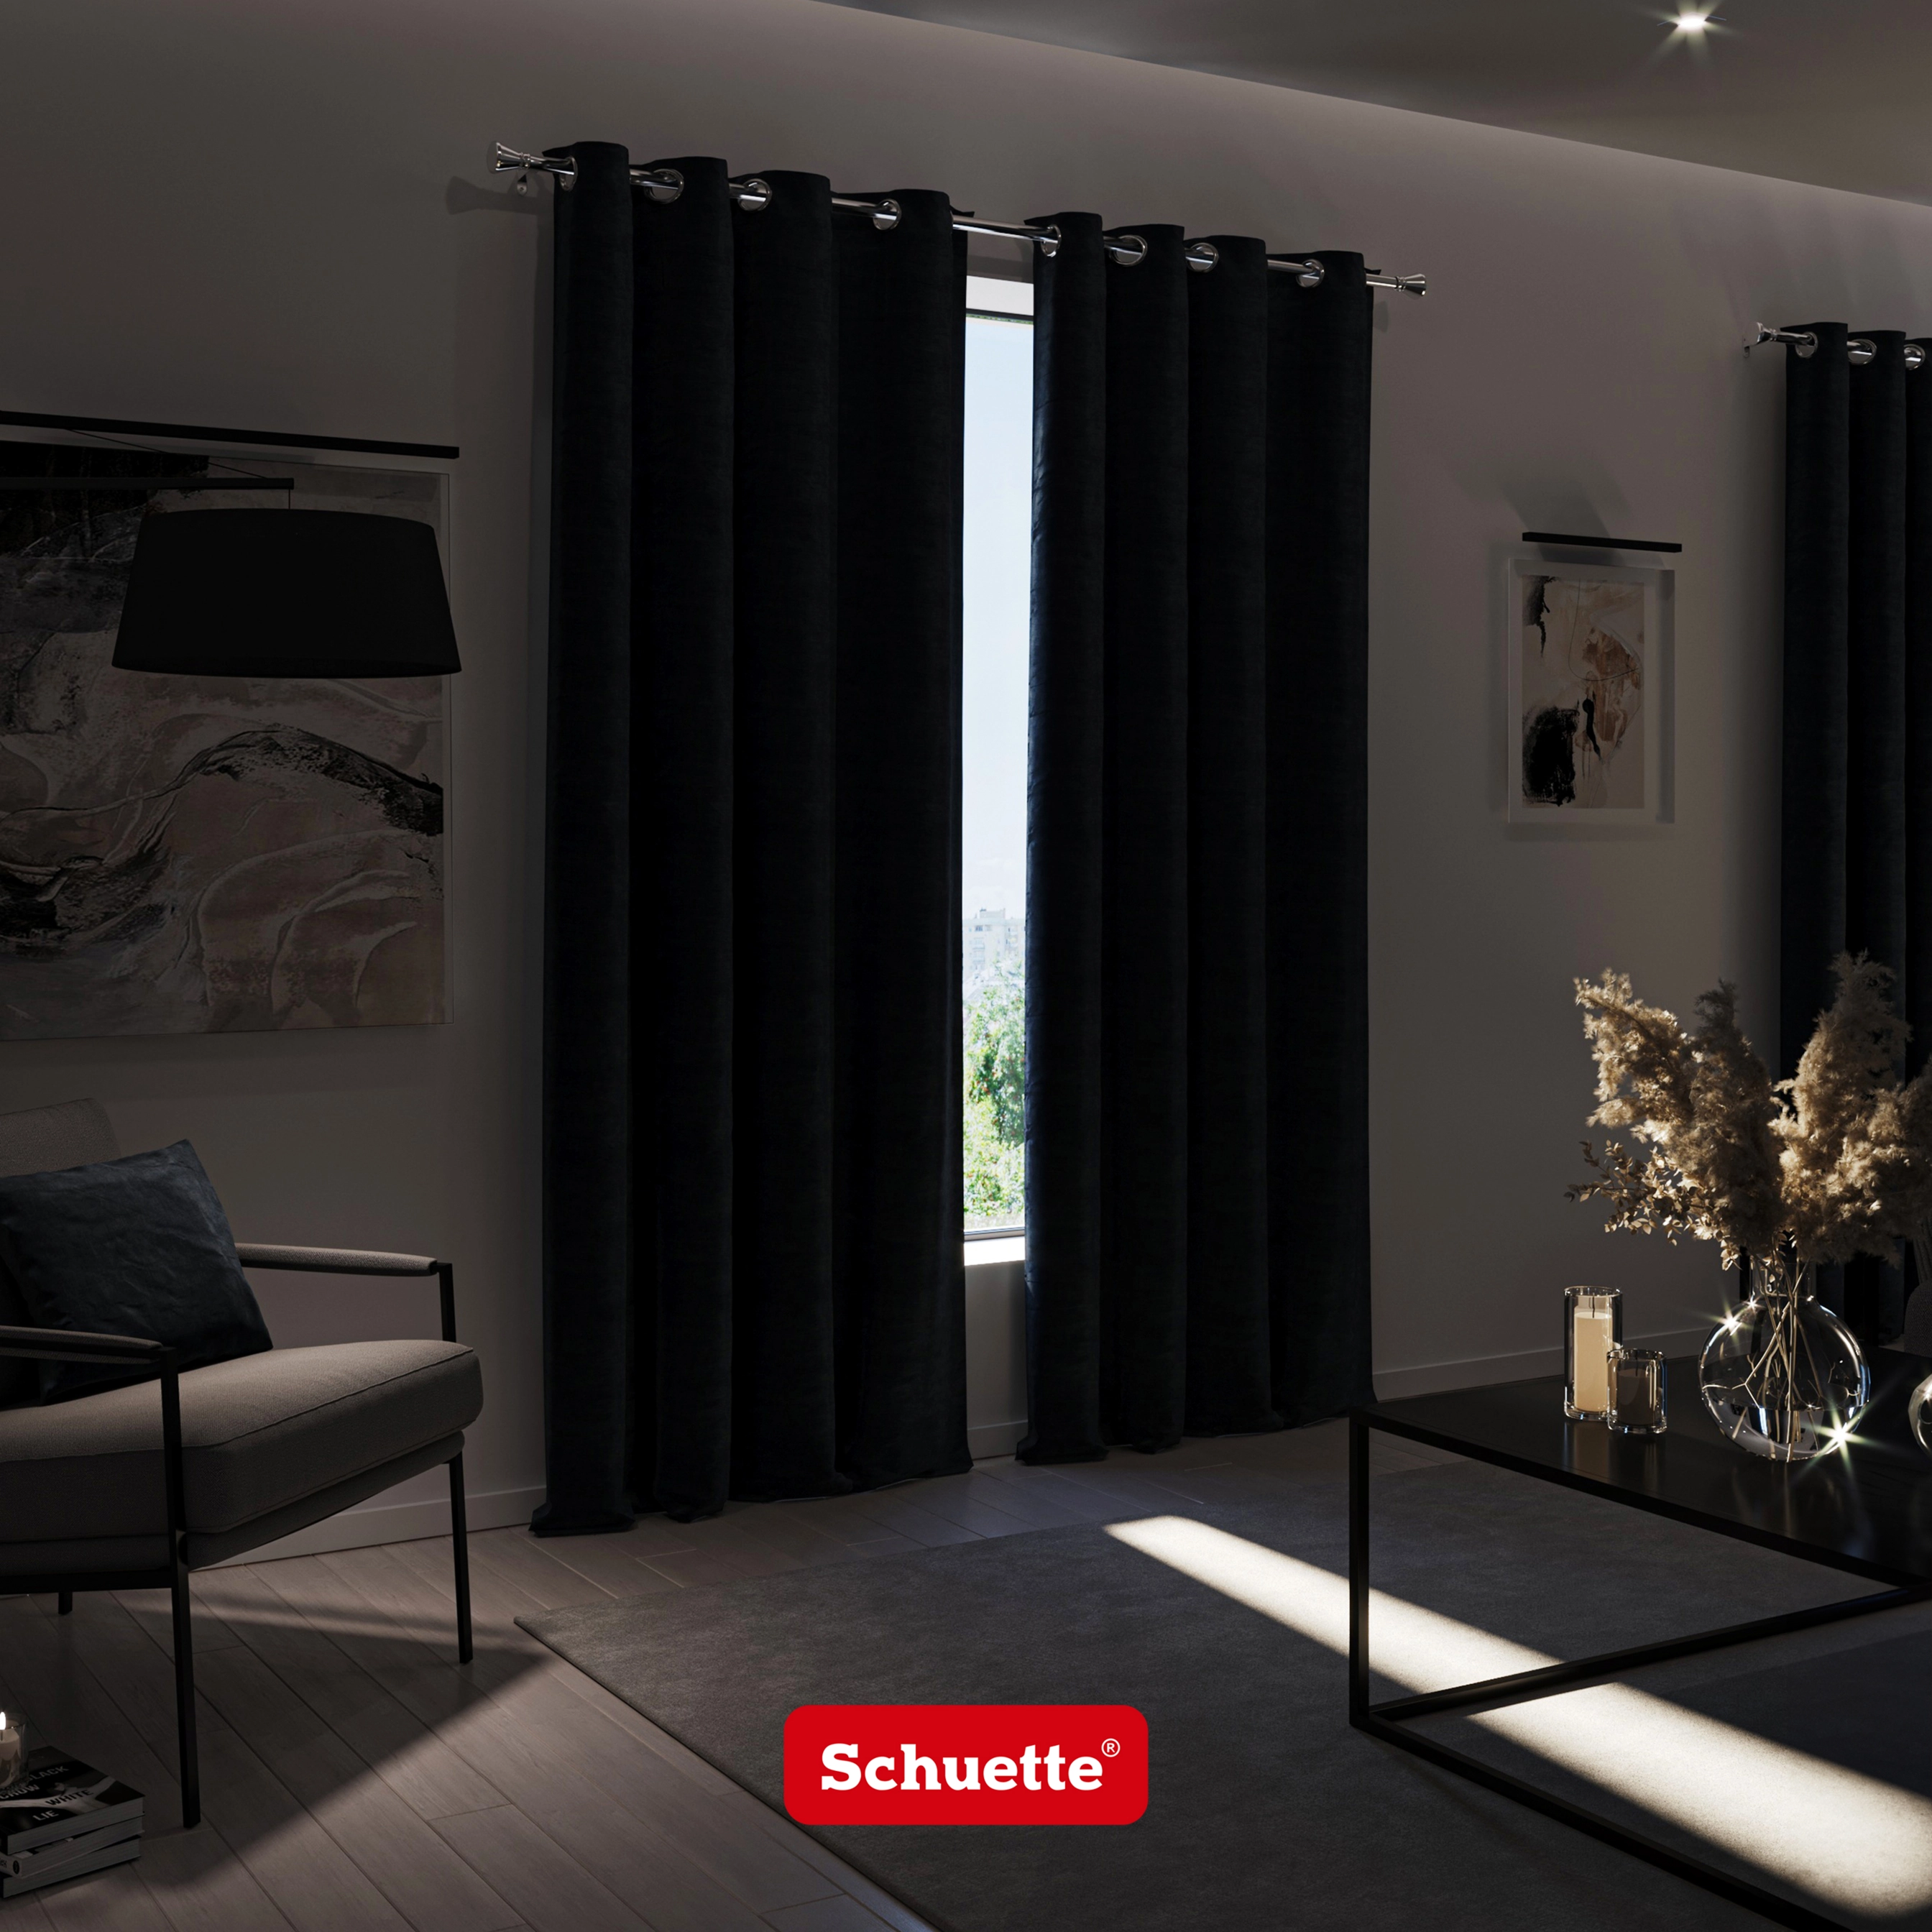 Schuette® Blackout Curtain with Eyelets ● Millenium Velvet Collection: Marmalade (Orange) ● 1 piece ● Crease-resistant Easy-care Thermo Opaque & heavily darkening